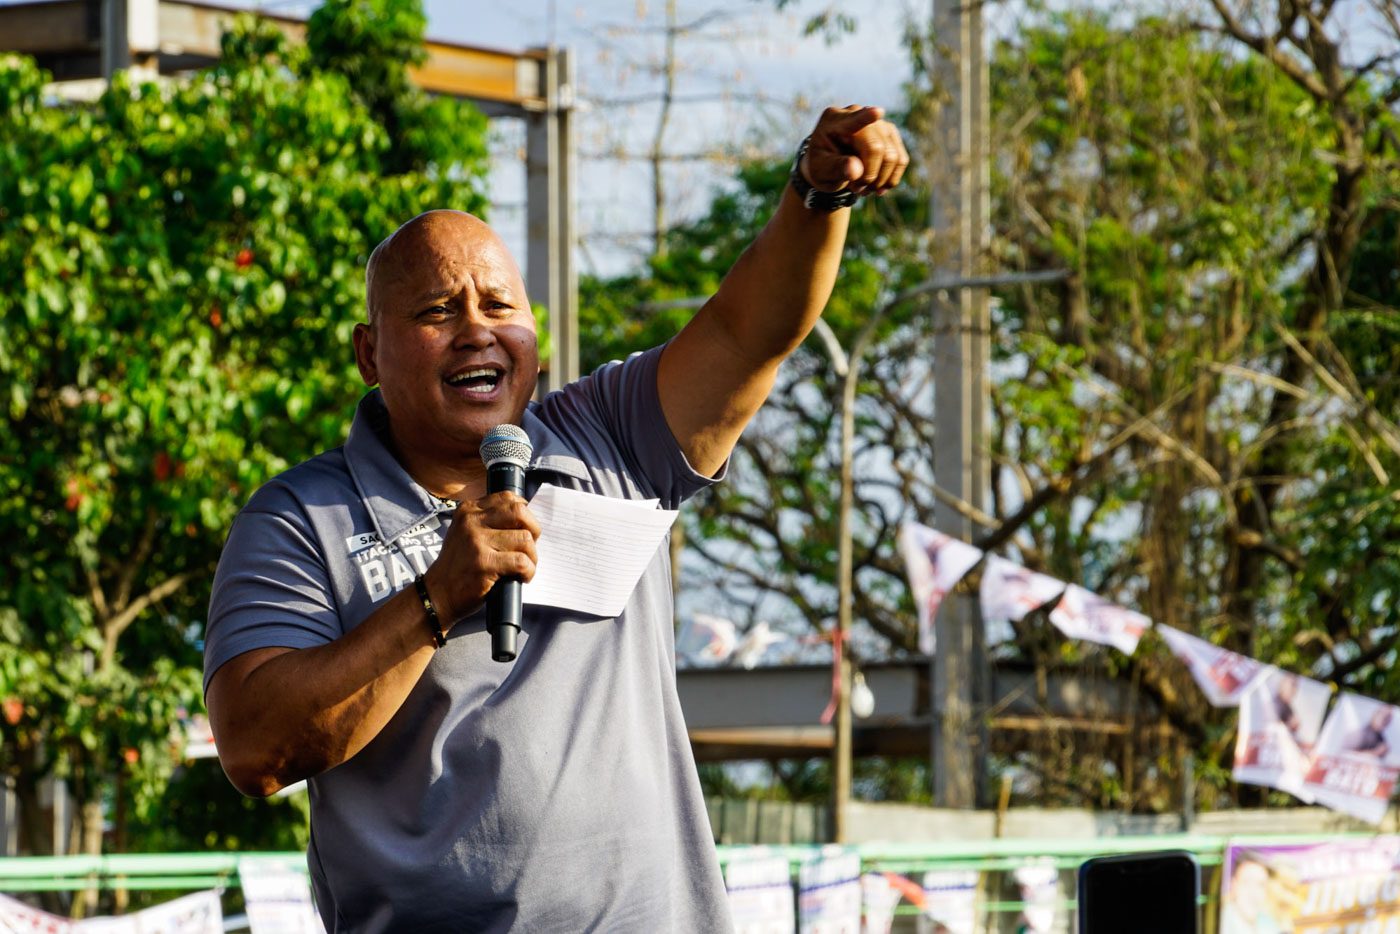 Dela Rosa jokes to crowd: Clap your hands or face Tokhang